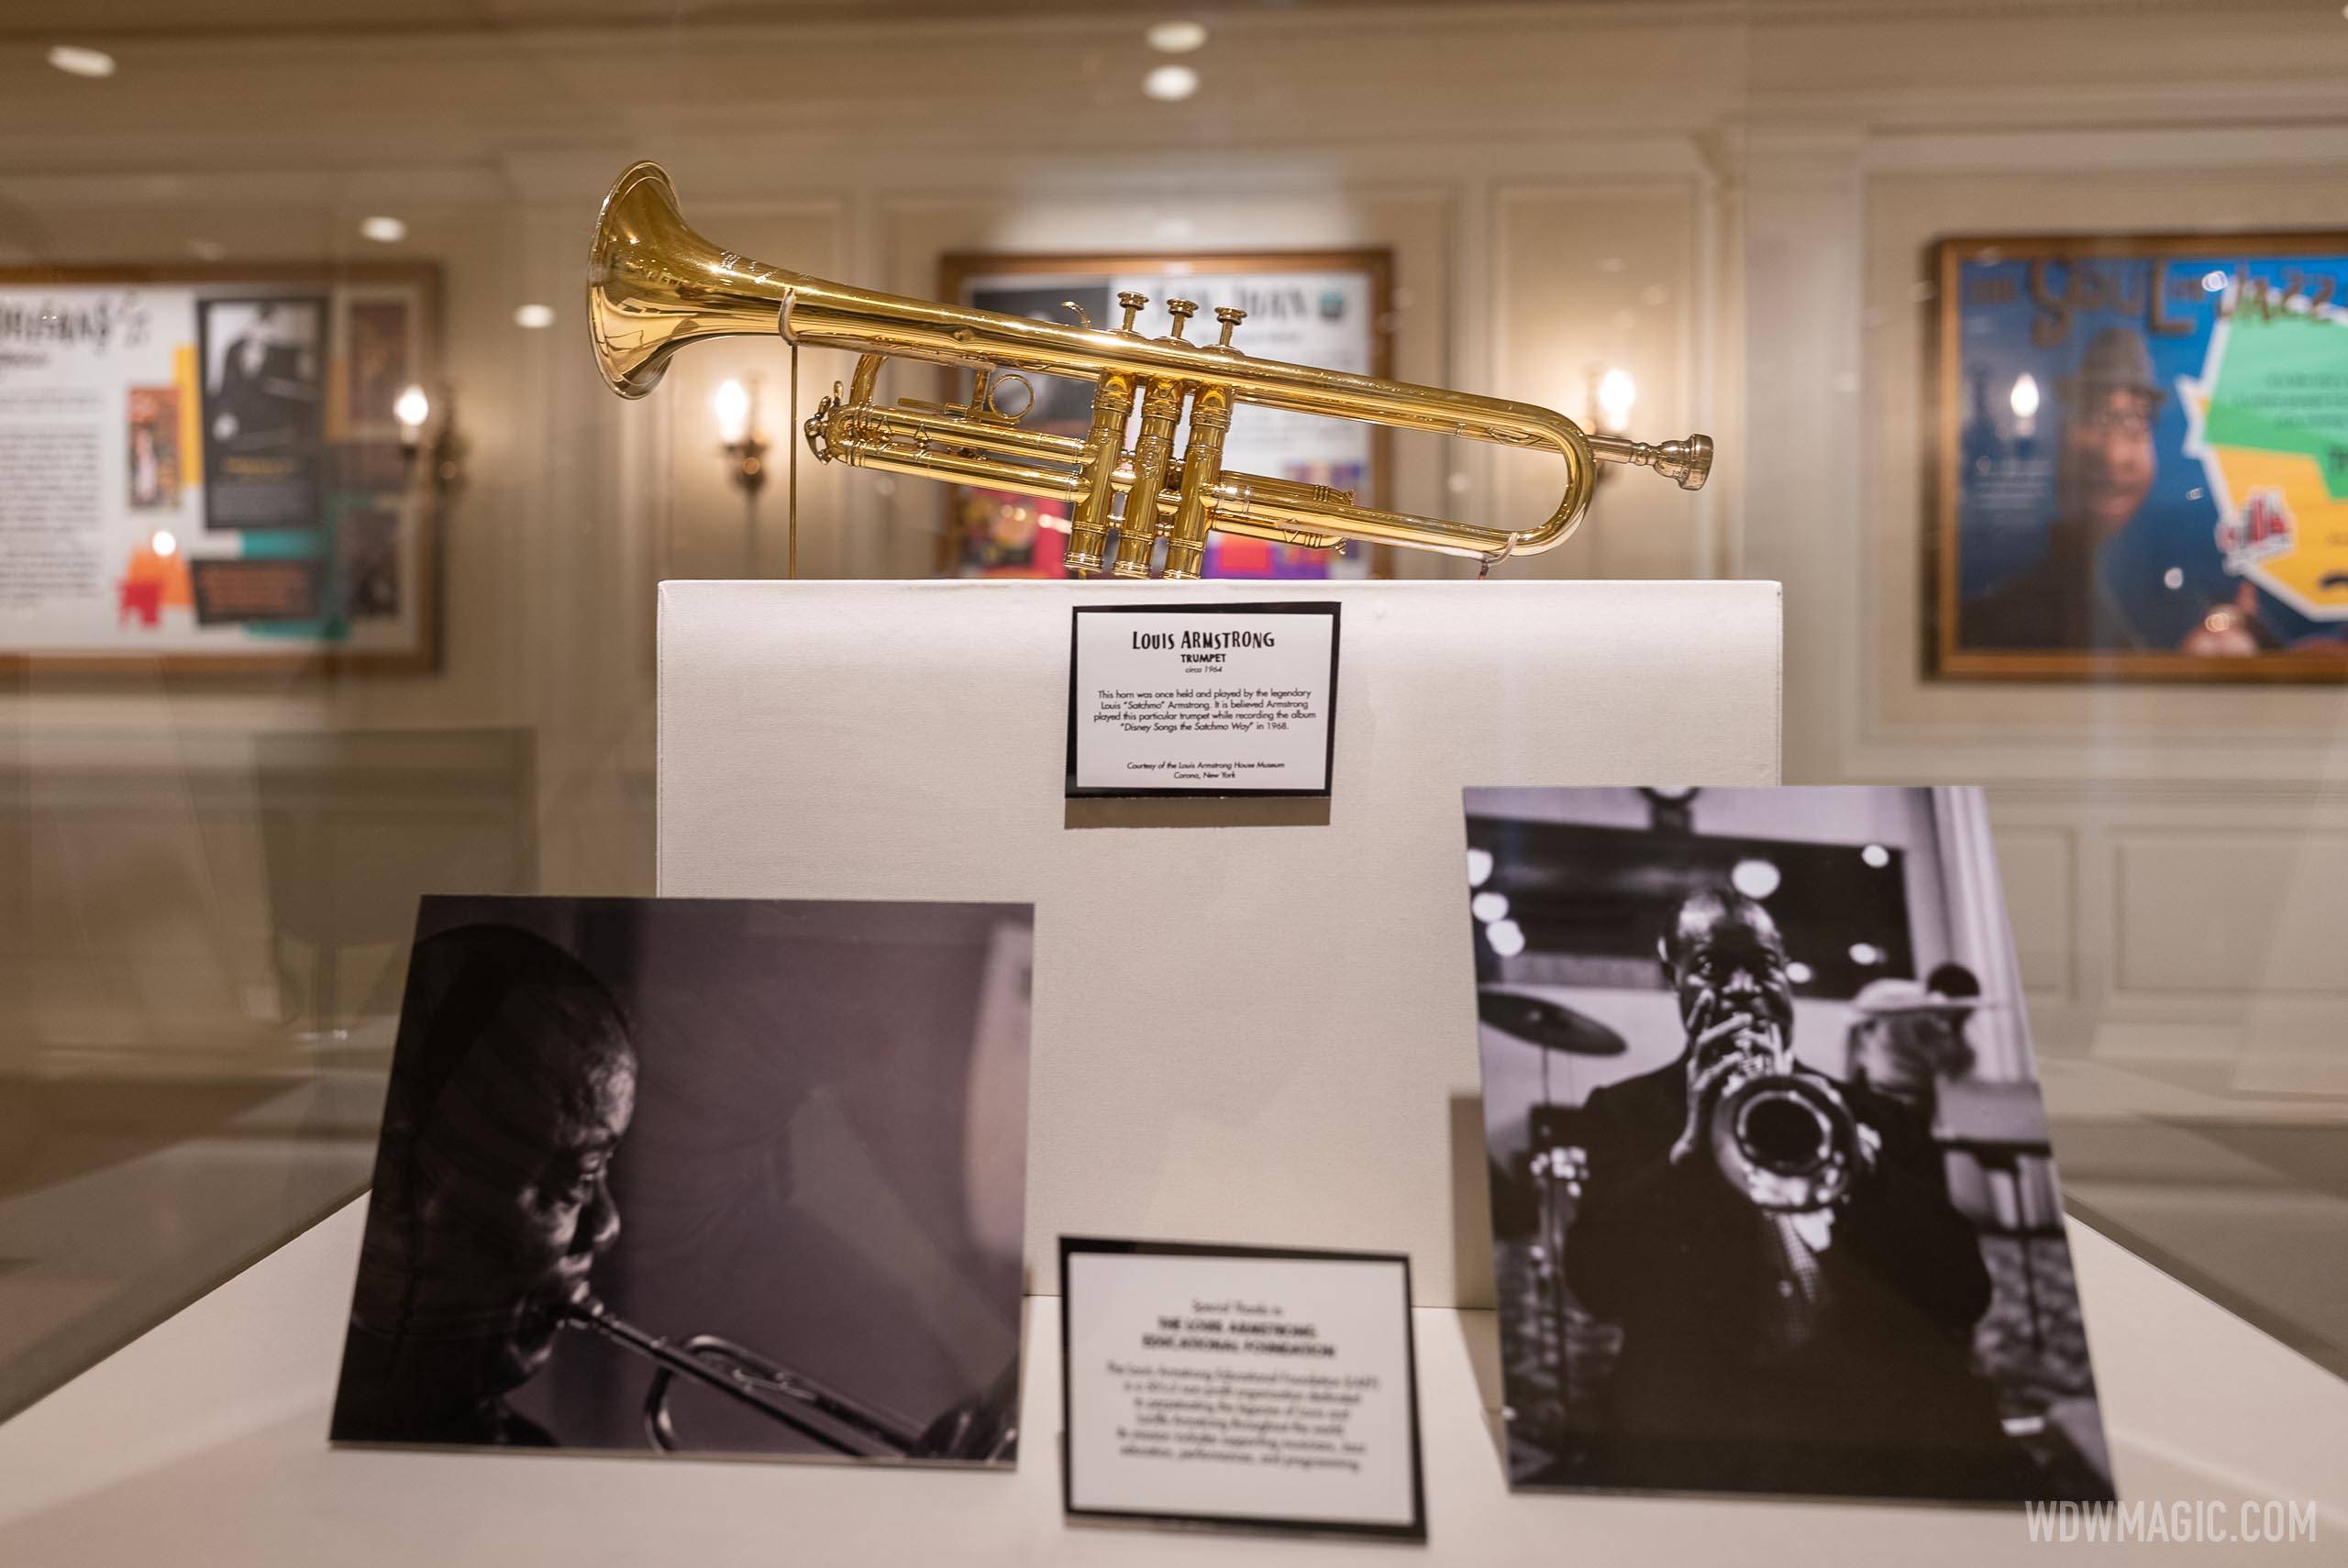 'The Soul of Jazz An American Adventure' exhibit